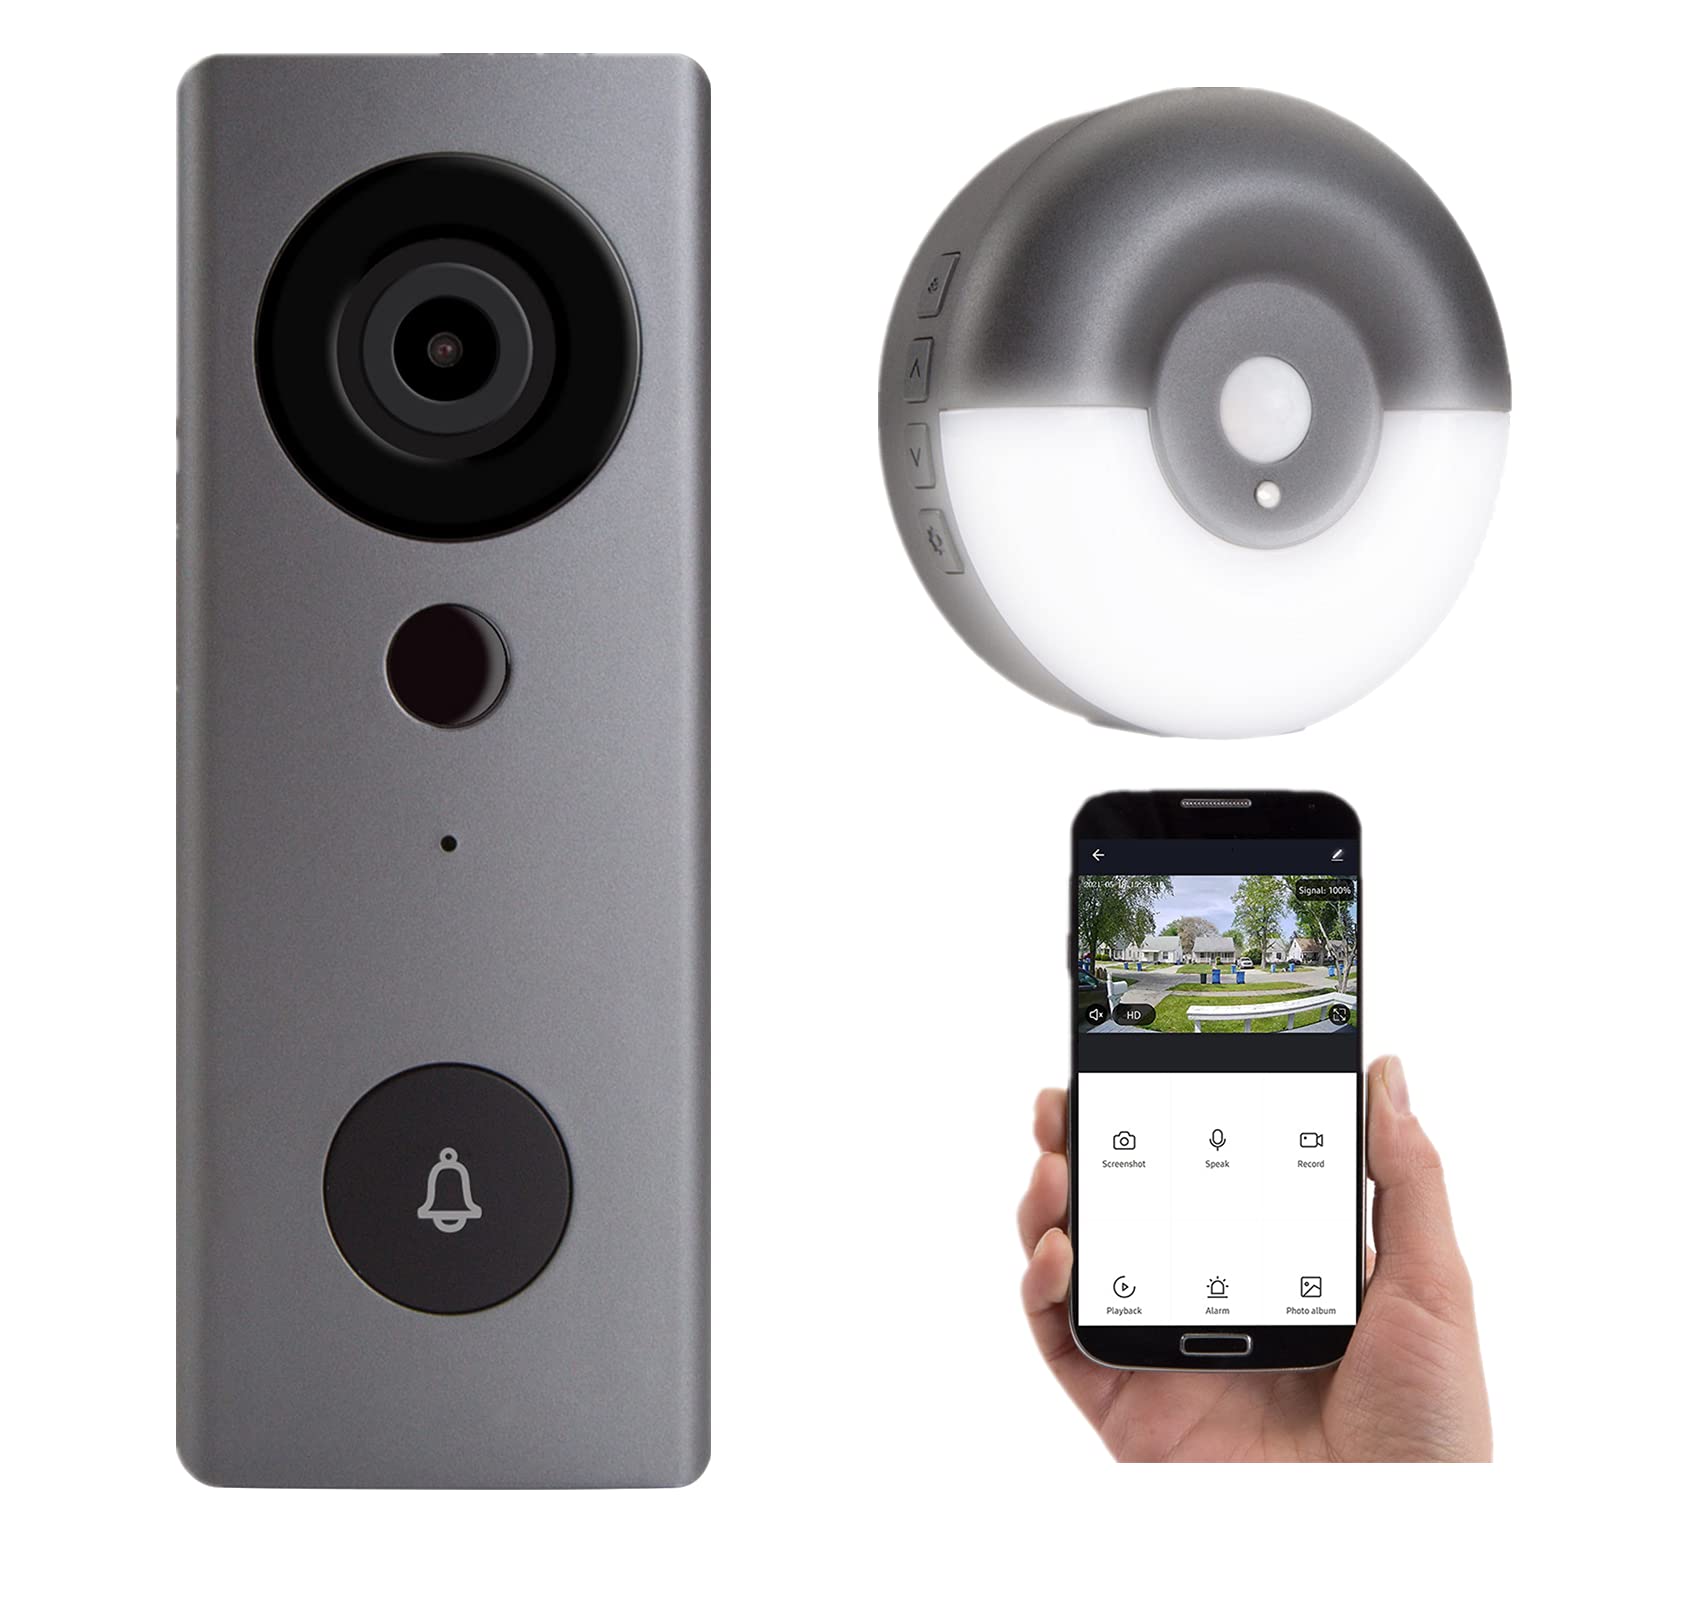 which-video-doorbell-works-with-existing-chime